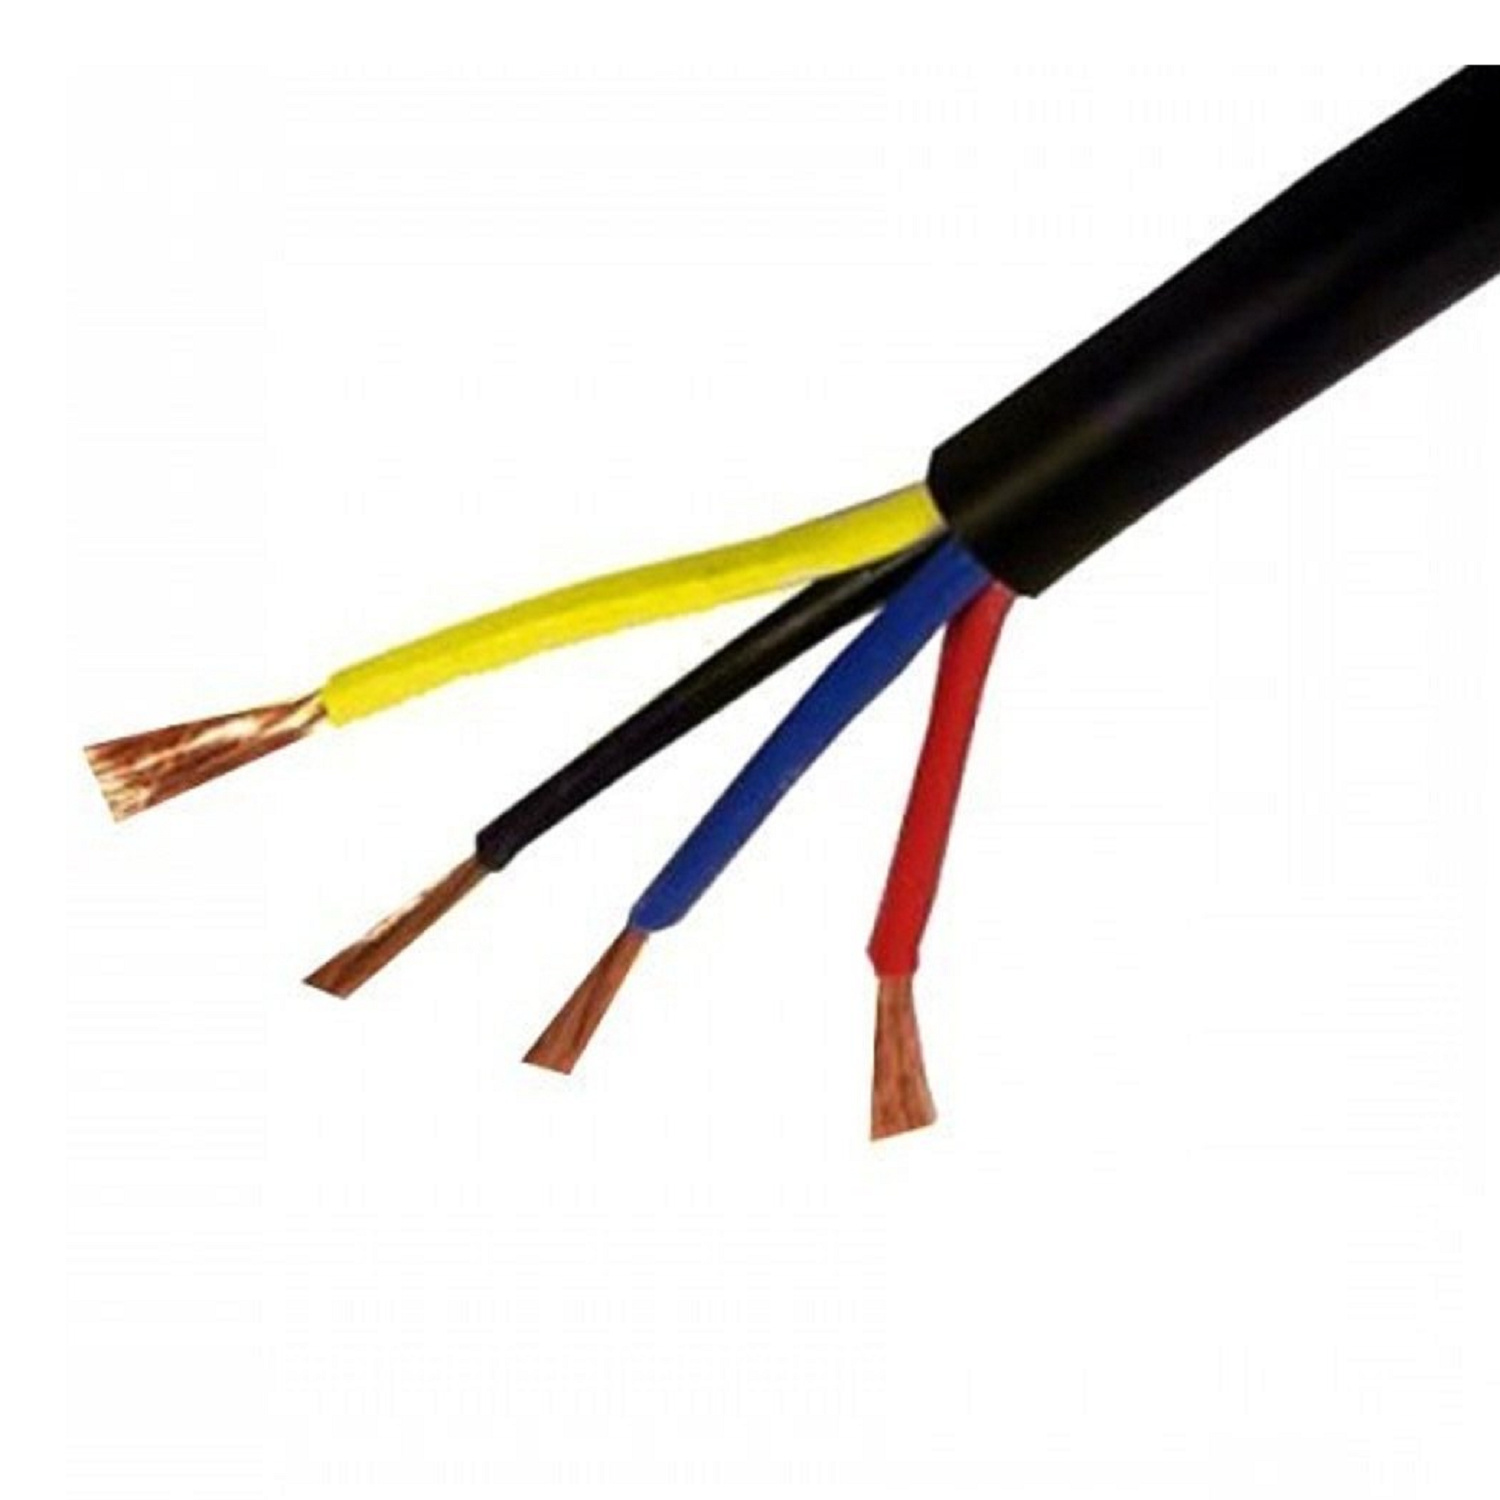 6.0 Sqmm Finolex Copper Flexible Cable With PVC Insulated For Domestic 38 Industrial Uses